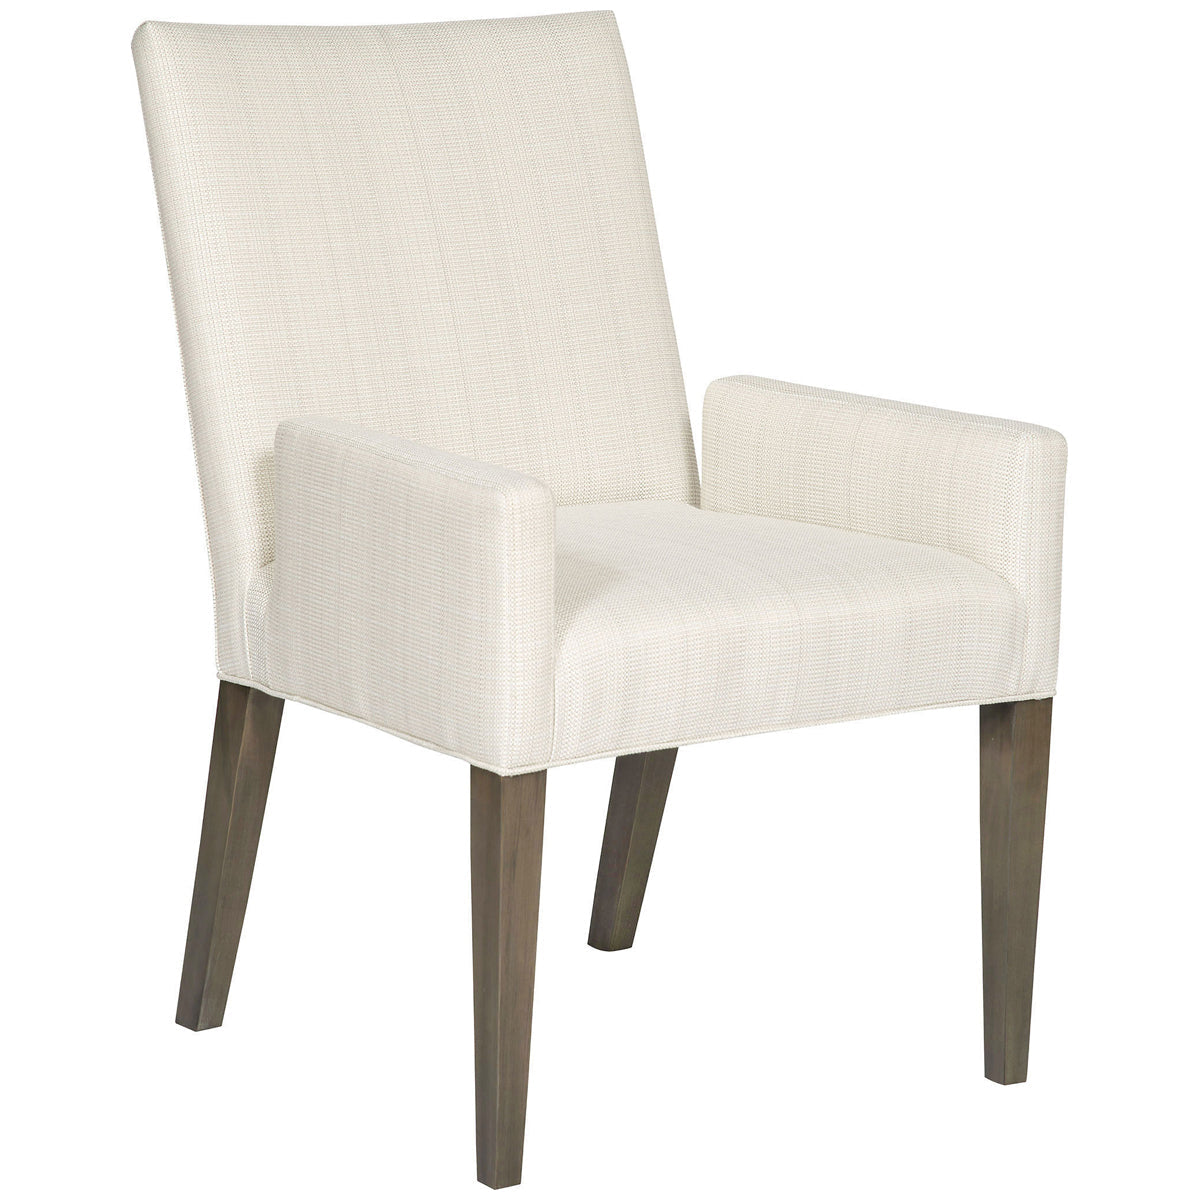 Vanguard Furniture Axis II Stocked Performance Dining Arm Chair